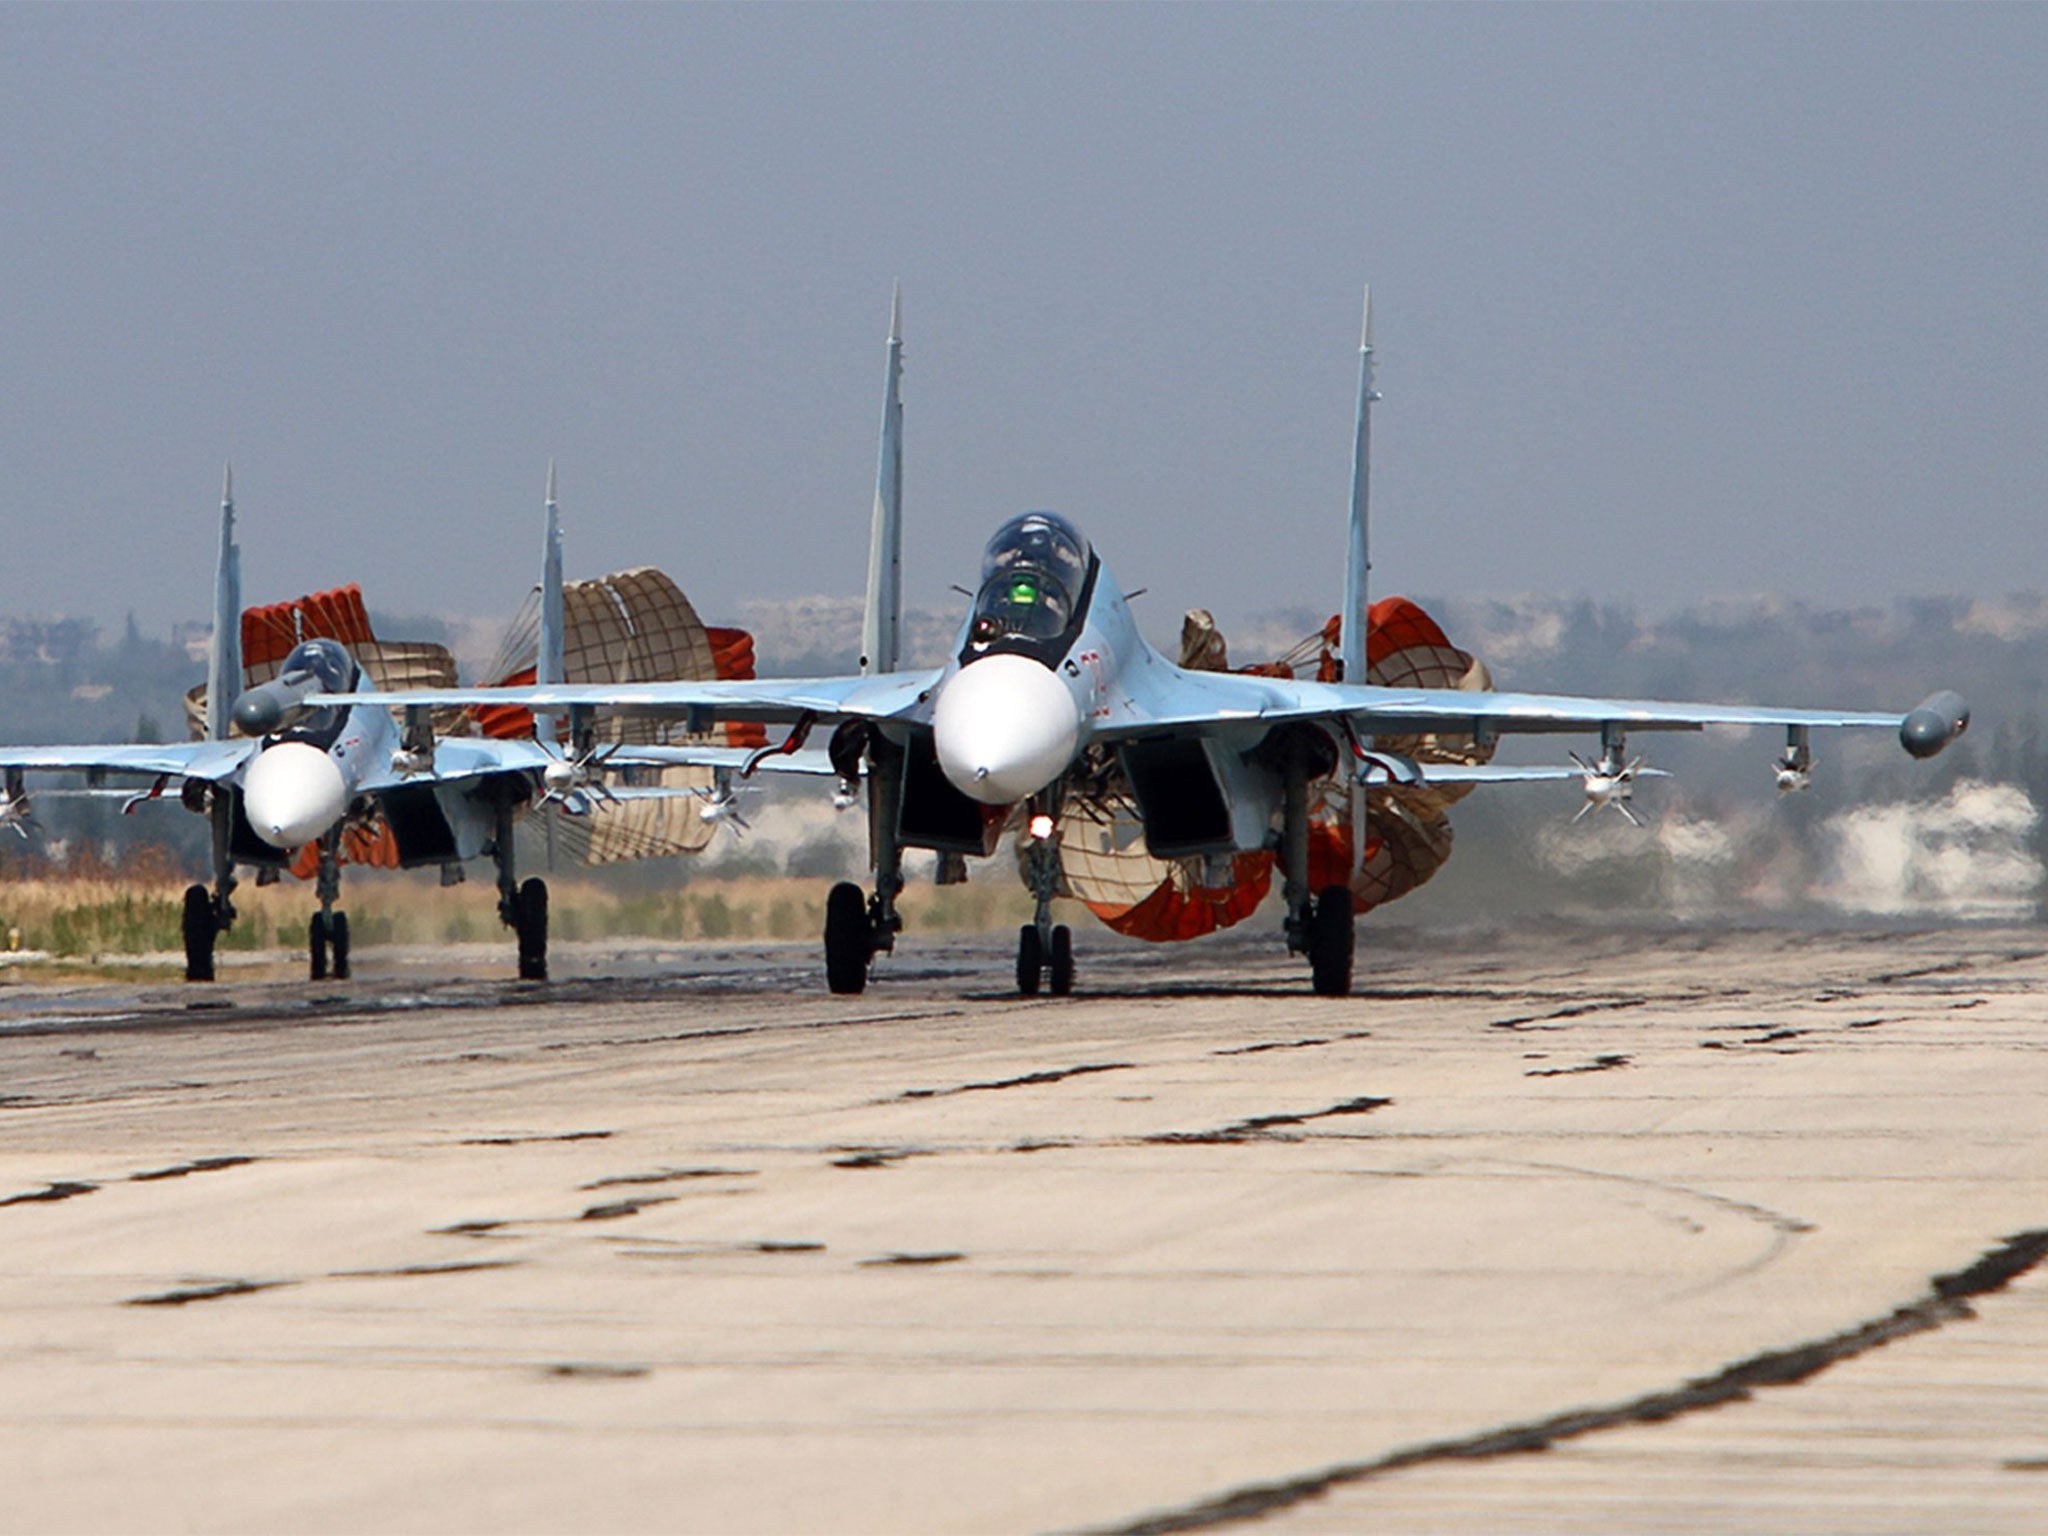 Russian jets have been accused of providing cover for President Assad's forces